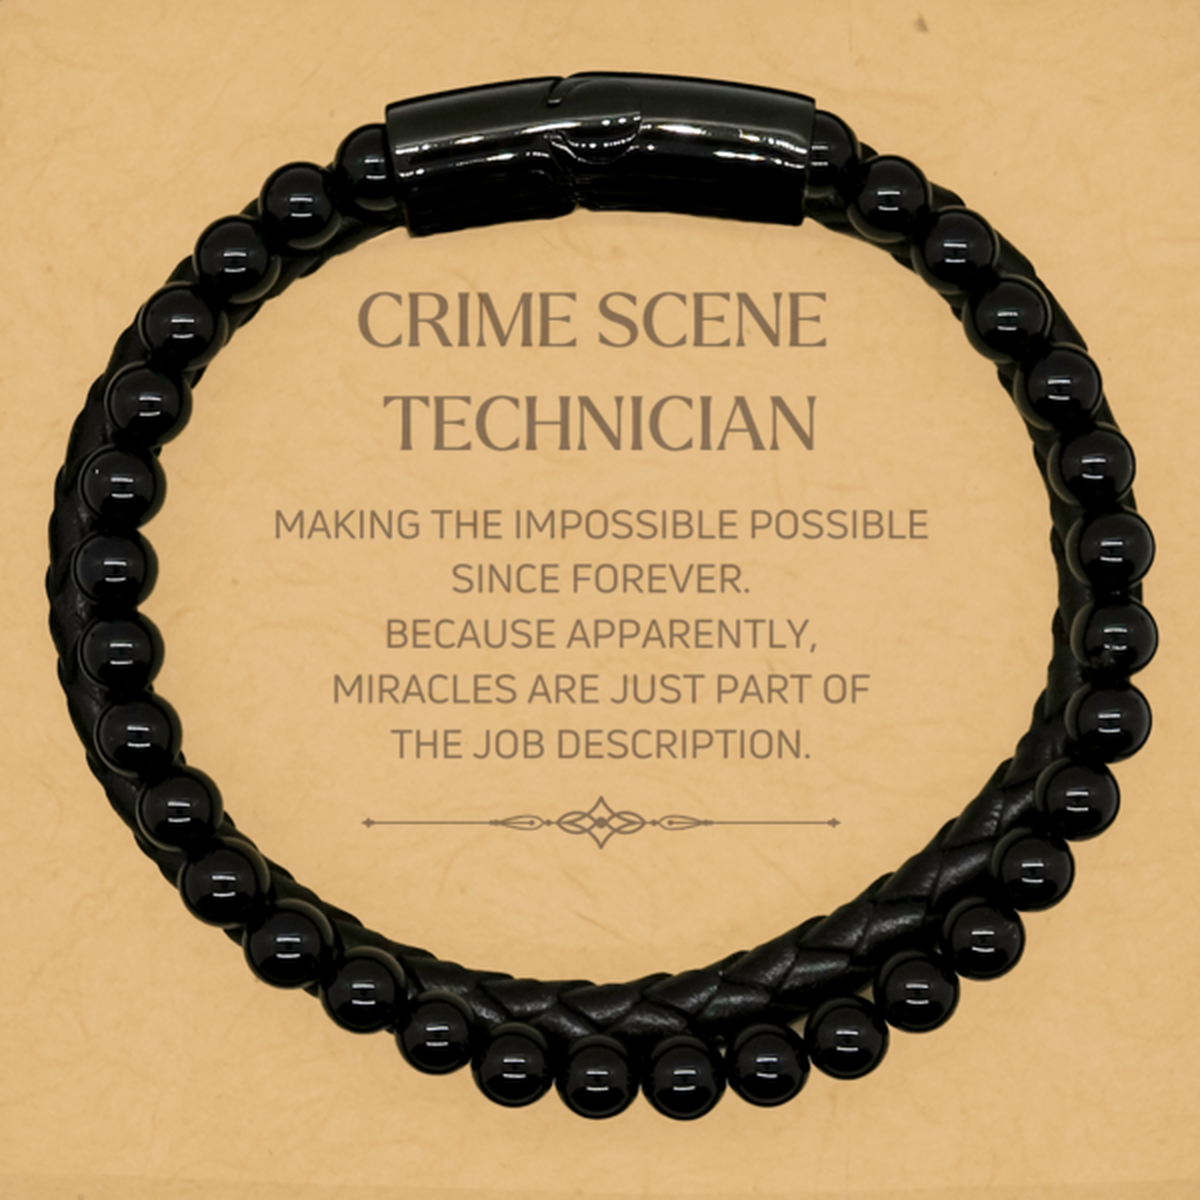 Funny Crime Scene Technician Gifts, Miracles are just part of the job description, Inspirational Birthday Stone Leather Bracelets For Crime Scene Technician, Men, Women, Coworkers, Friends, Boss